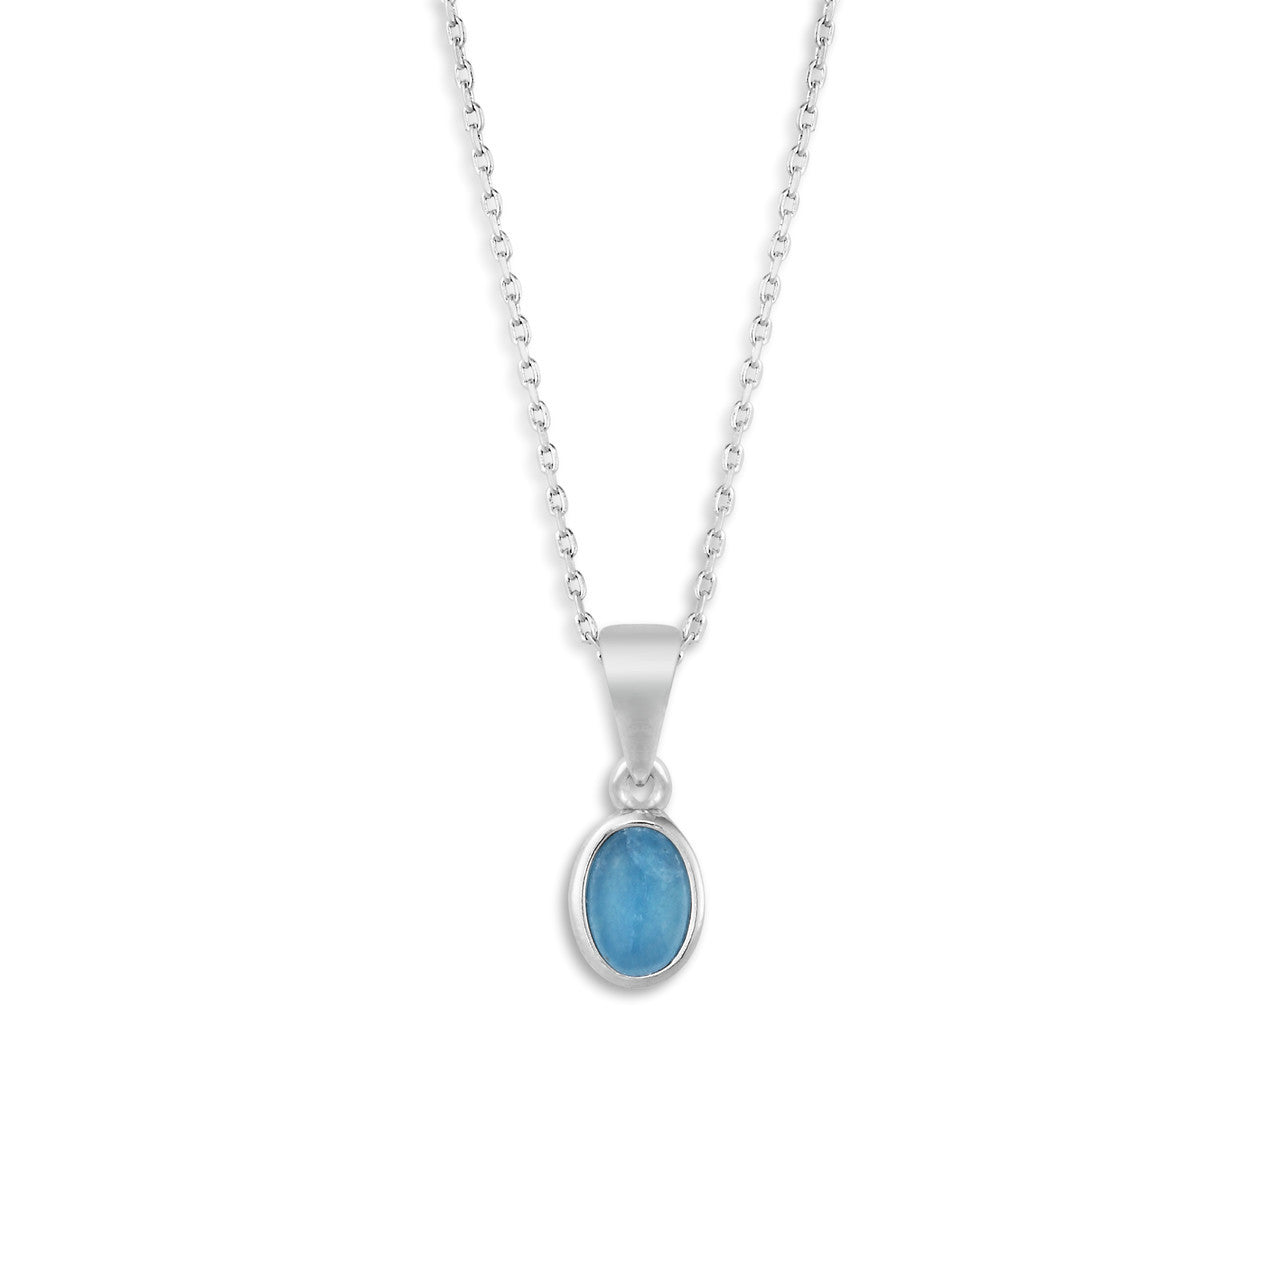 The Giving Necklace - Aquamarine